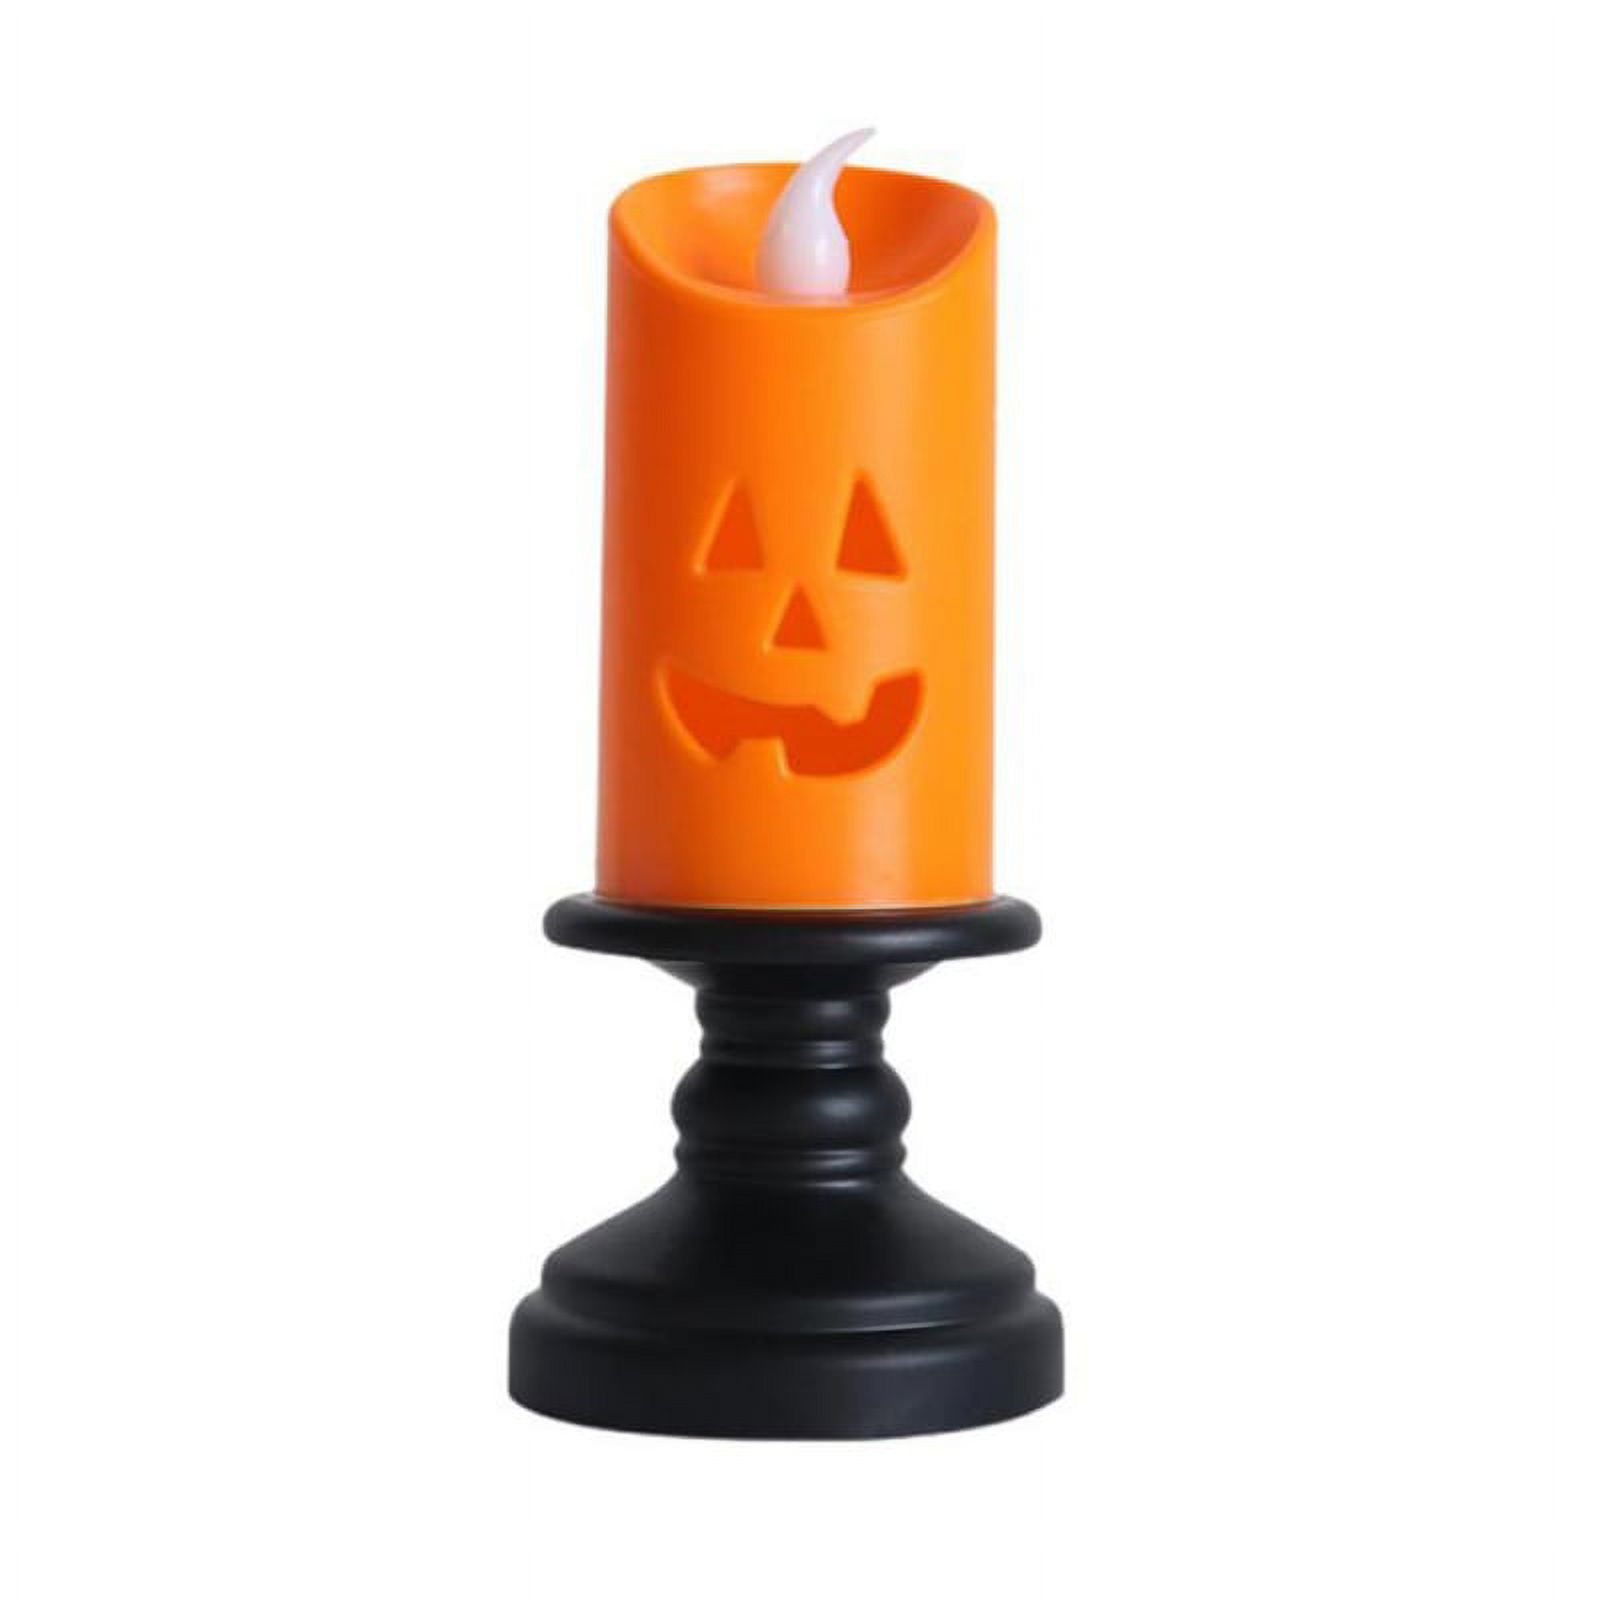 6 PACK Halloween Pumpkin Candle Light, Halloween Orange Flameless Candle Lights LED Lamps Festival Decor Light for Halloween Party - image 2 of 13